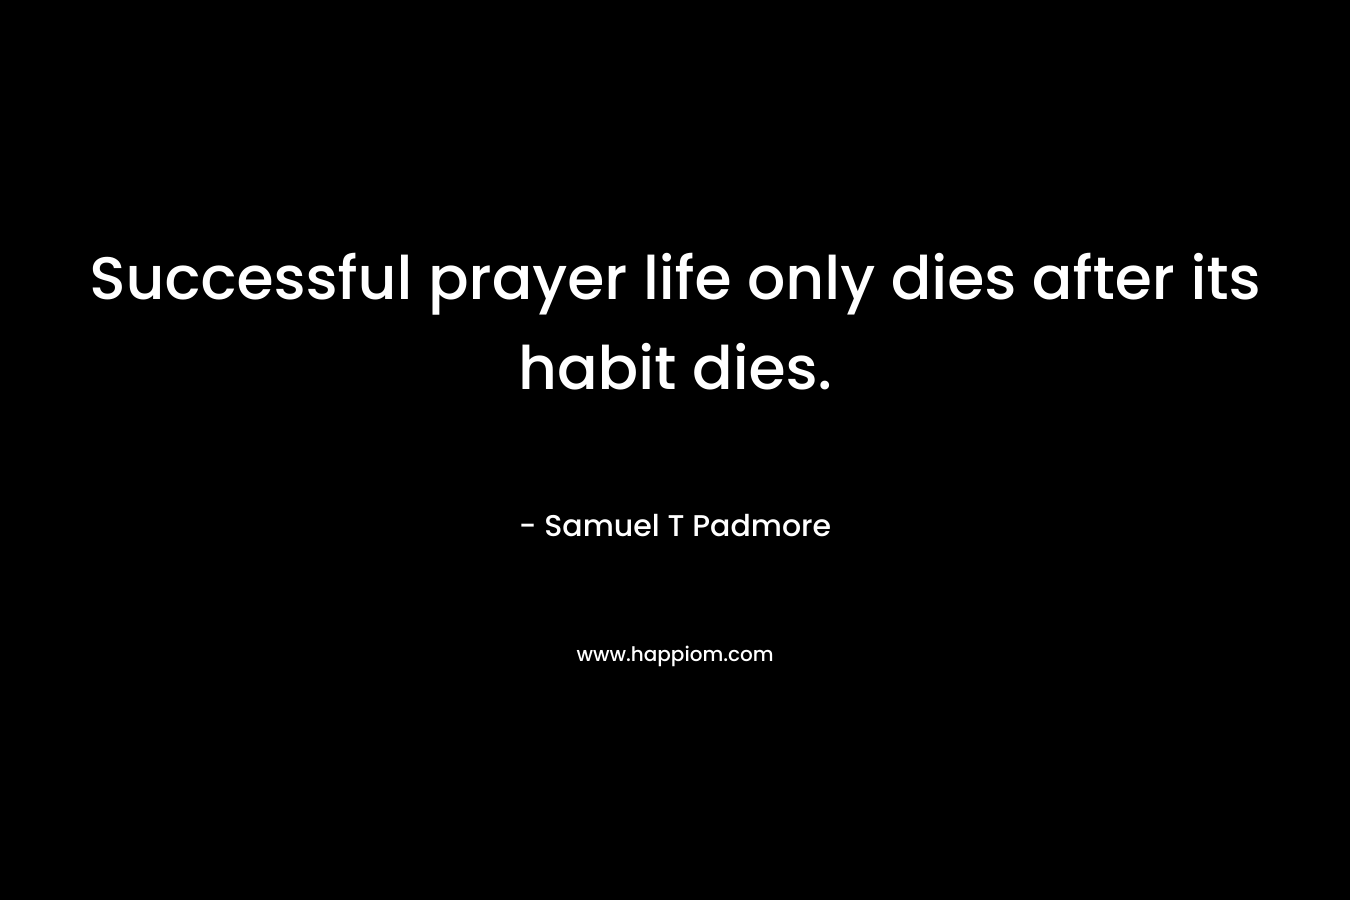 Successful prayer life only dies after its habit dies.